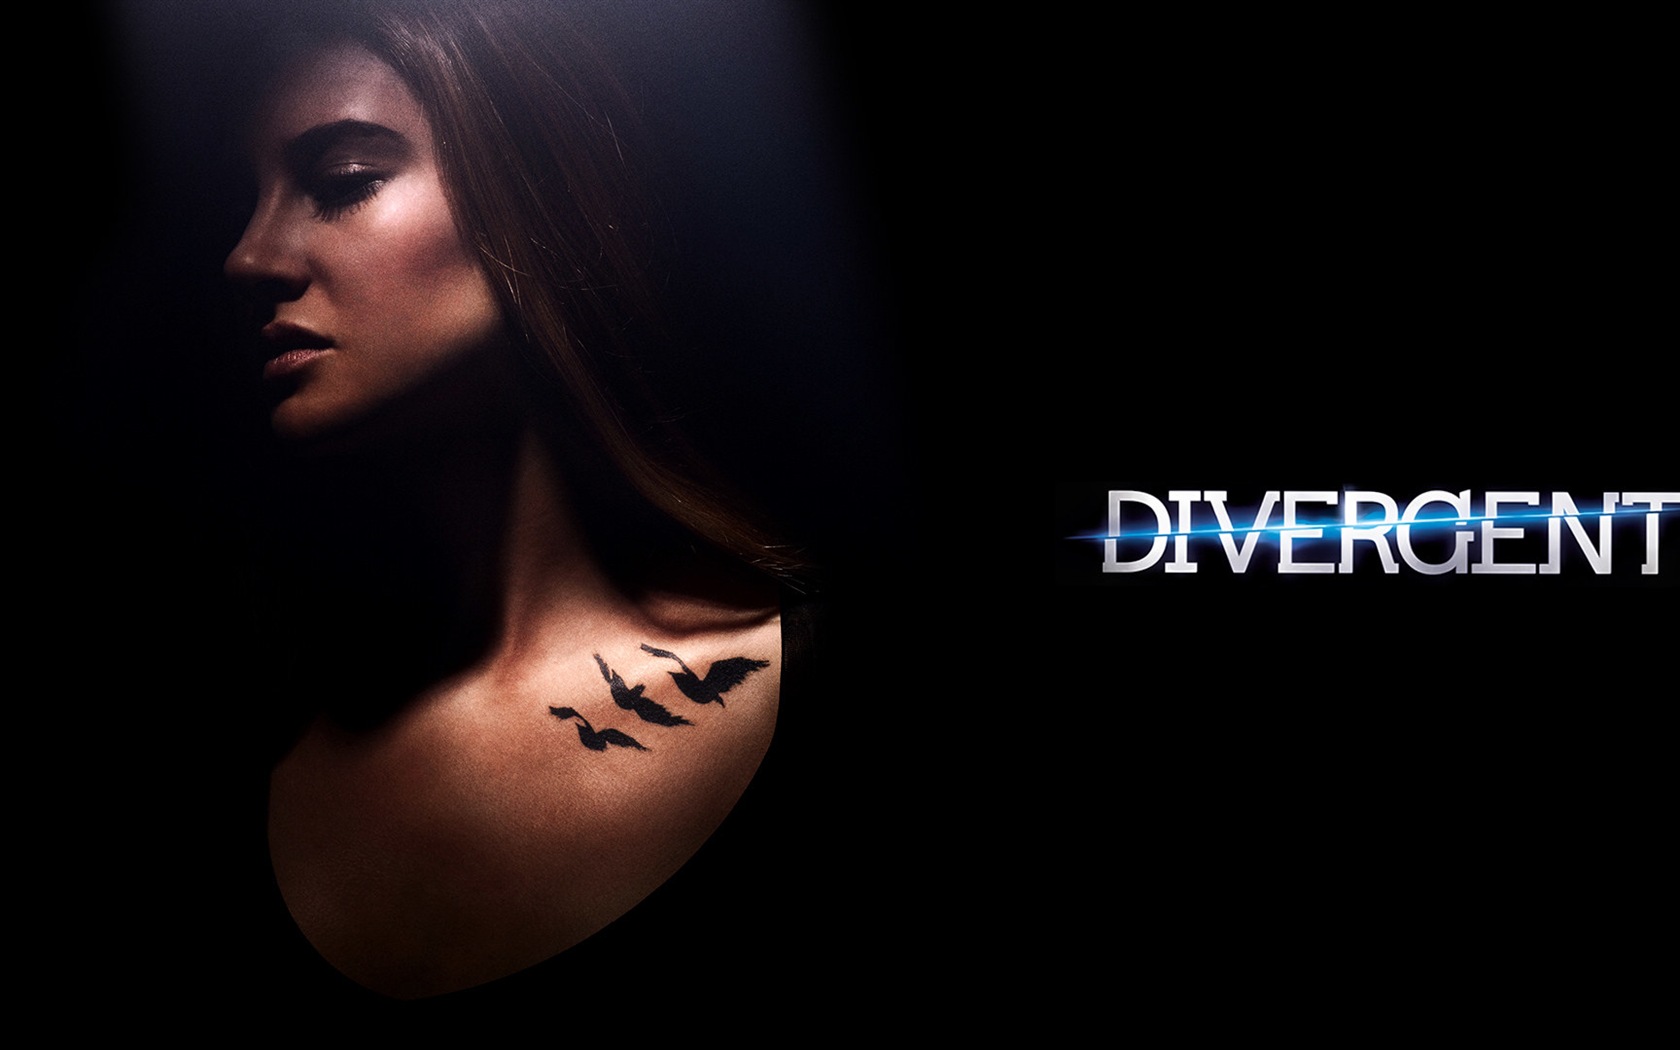 Divergent movie HD wallpapers #7 - 1680x1050